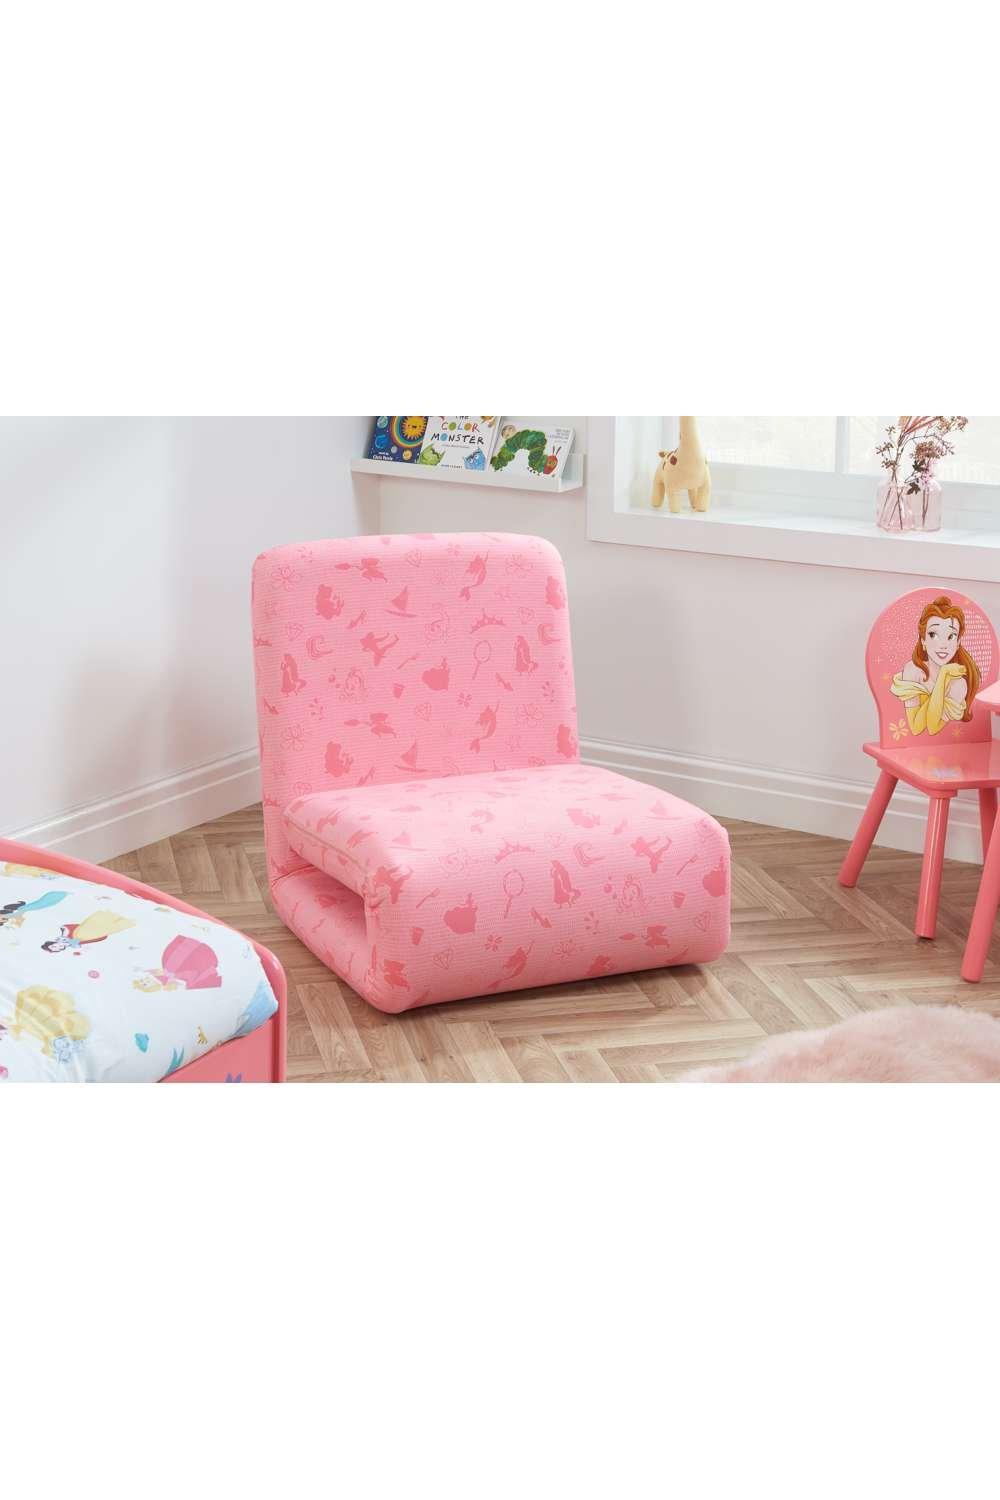 princess fold out bed chair